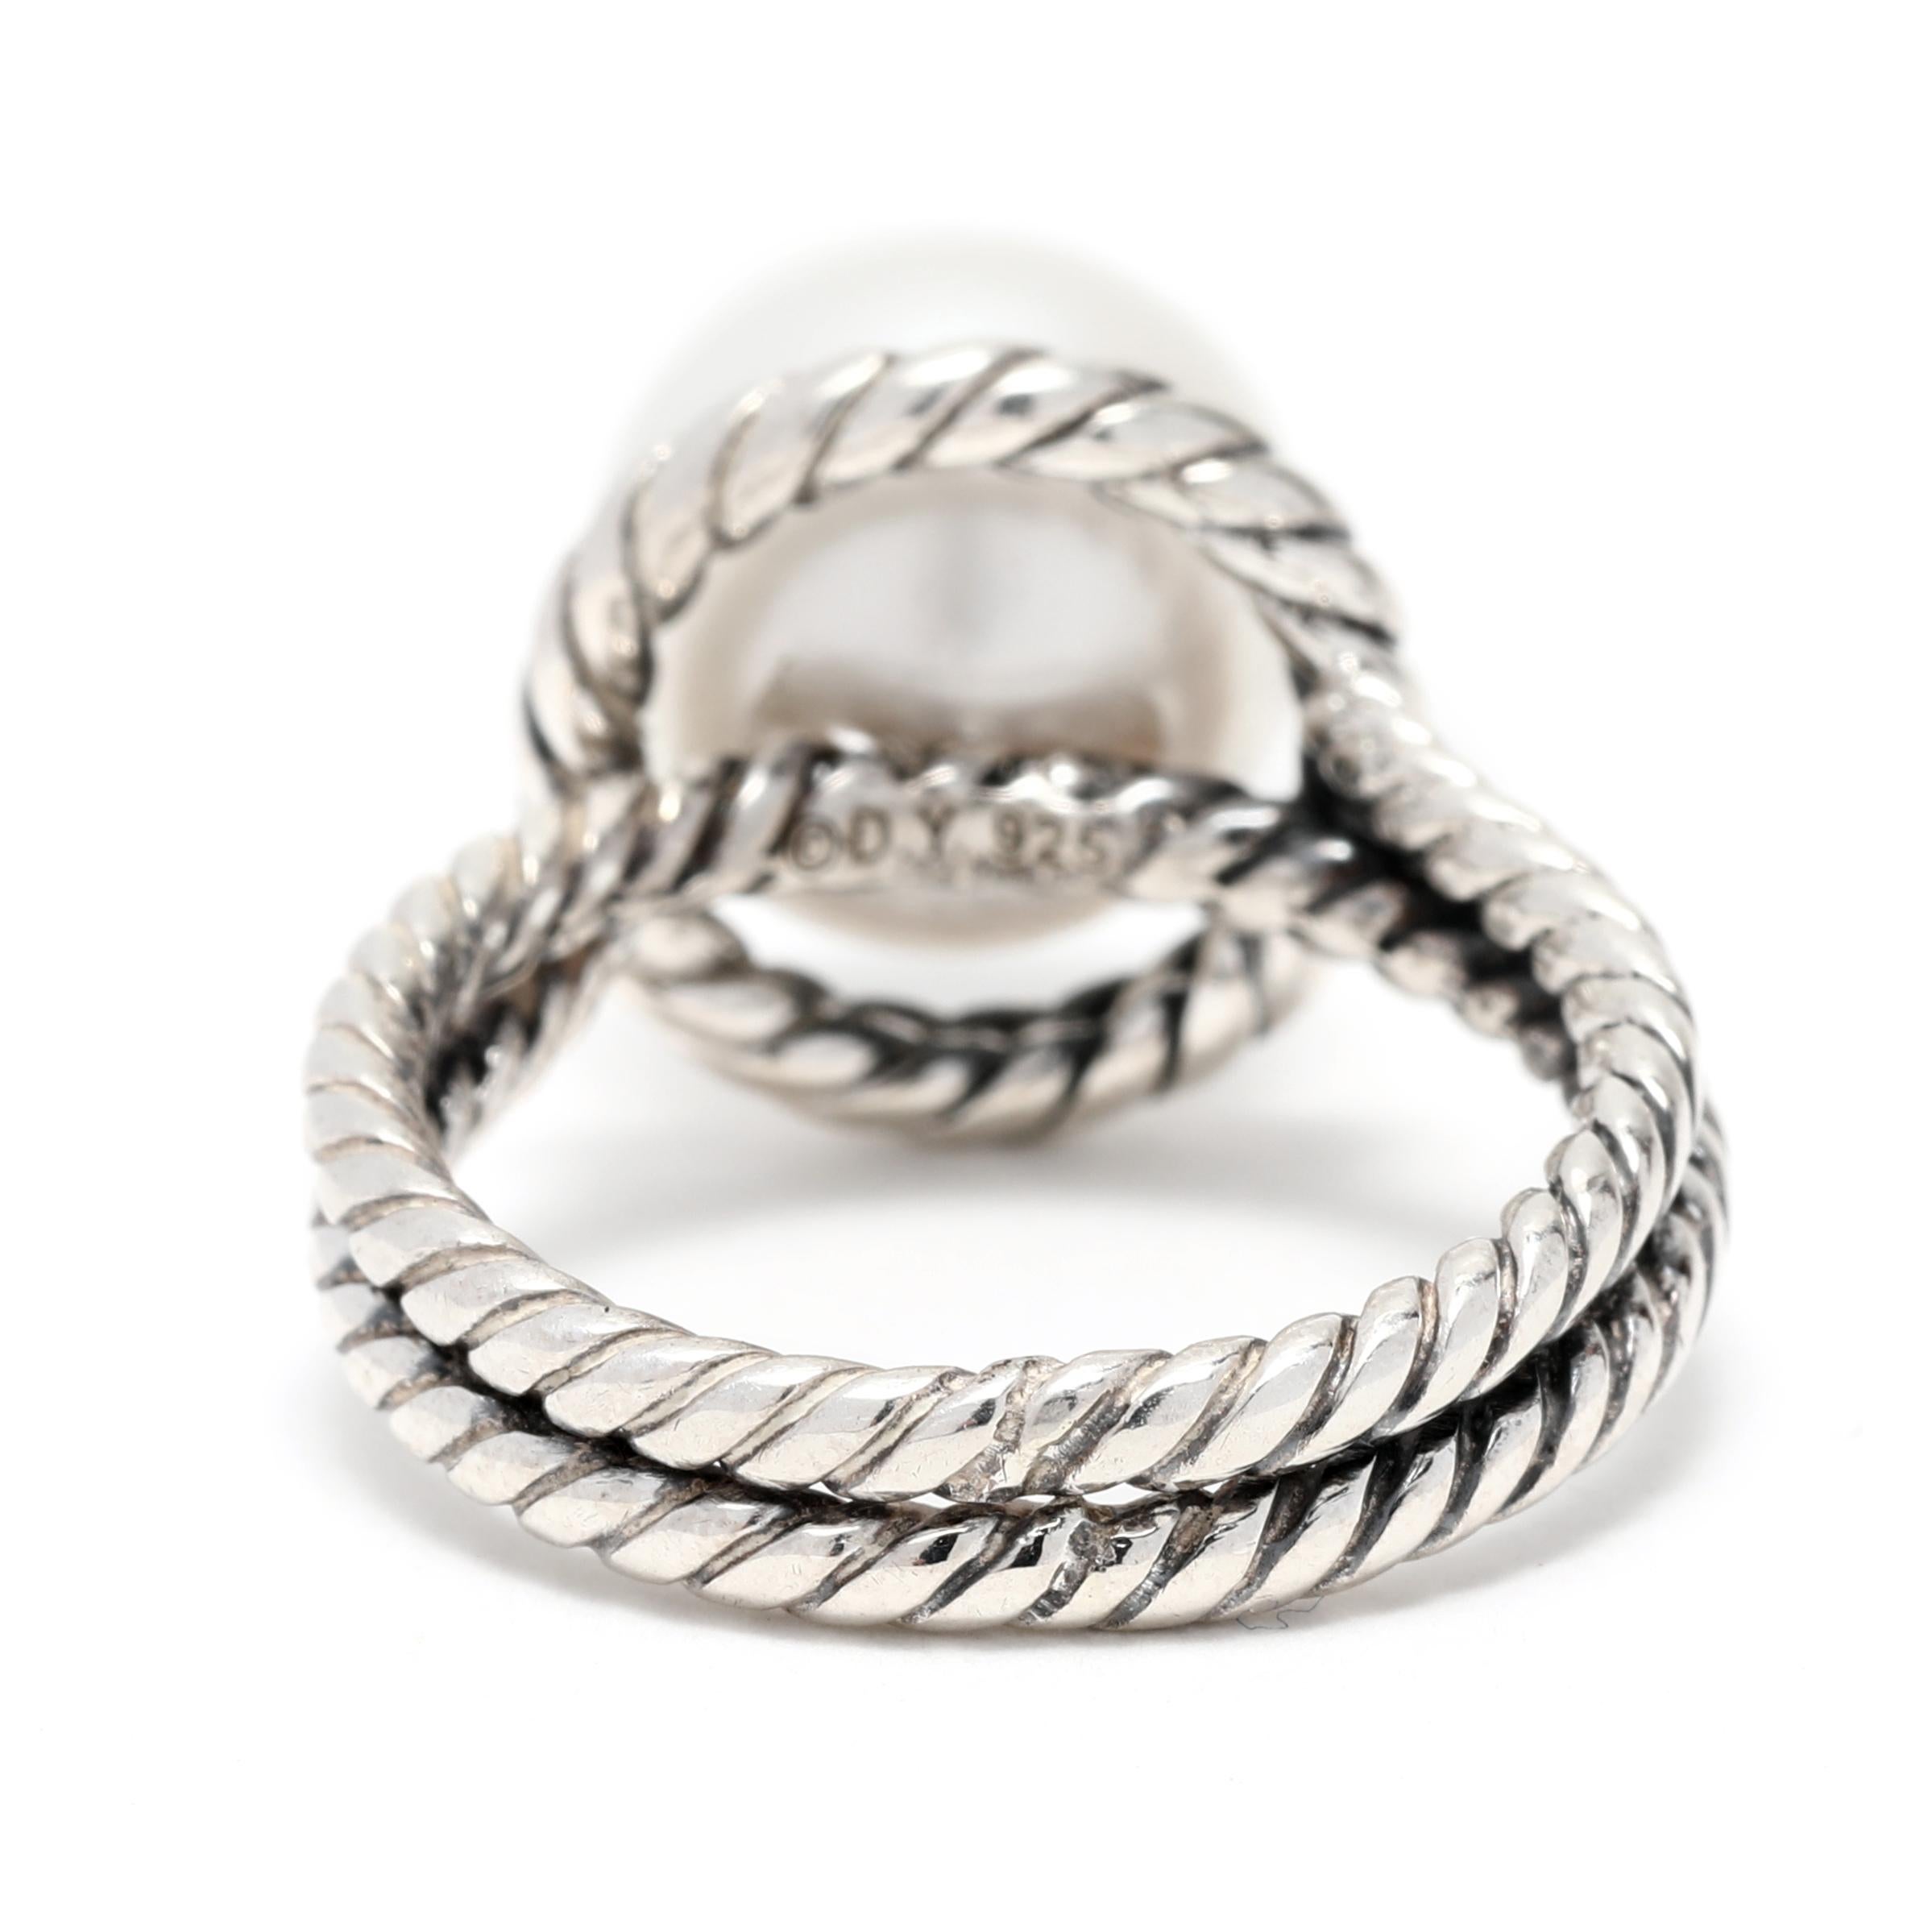 Bead David Yurman Cable Classics Pearl Cocktail Ring, Sterling Silver, Ring